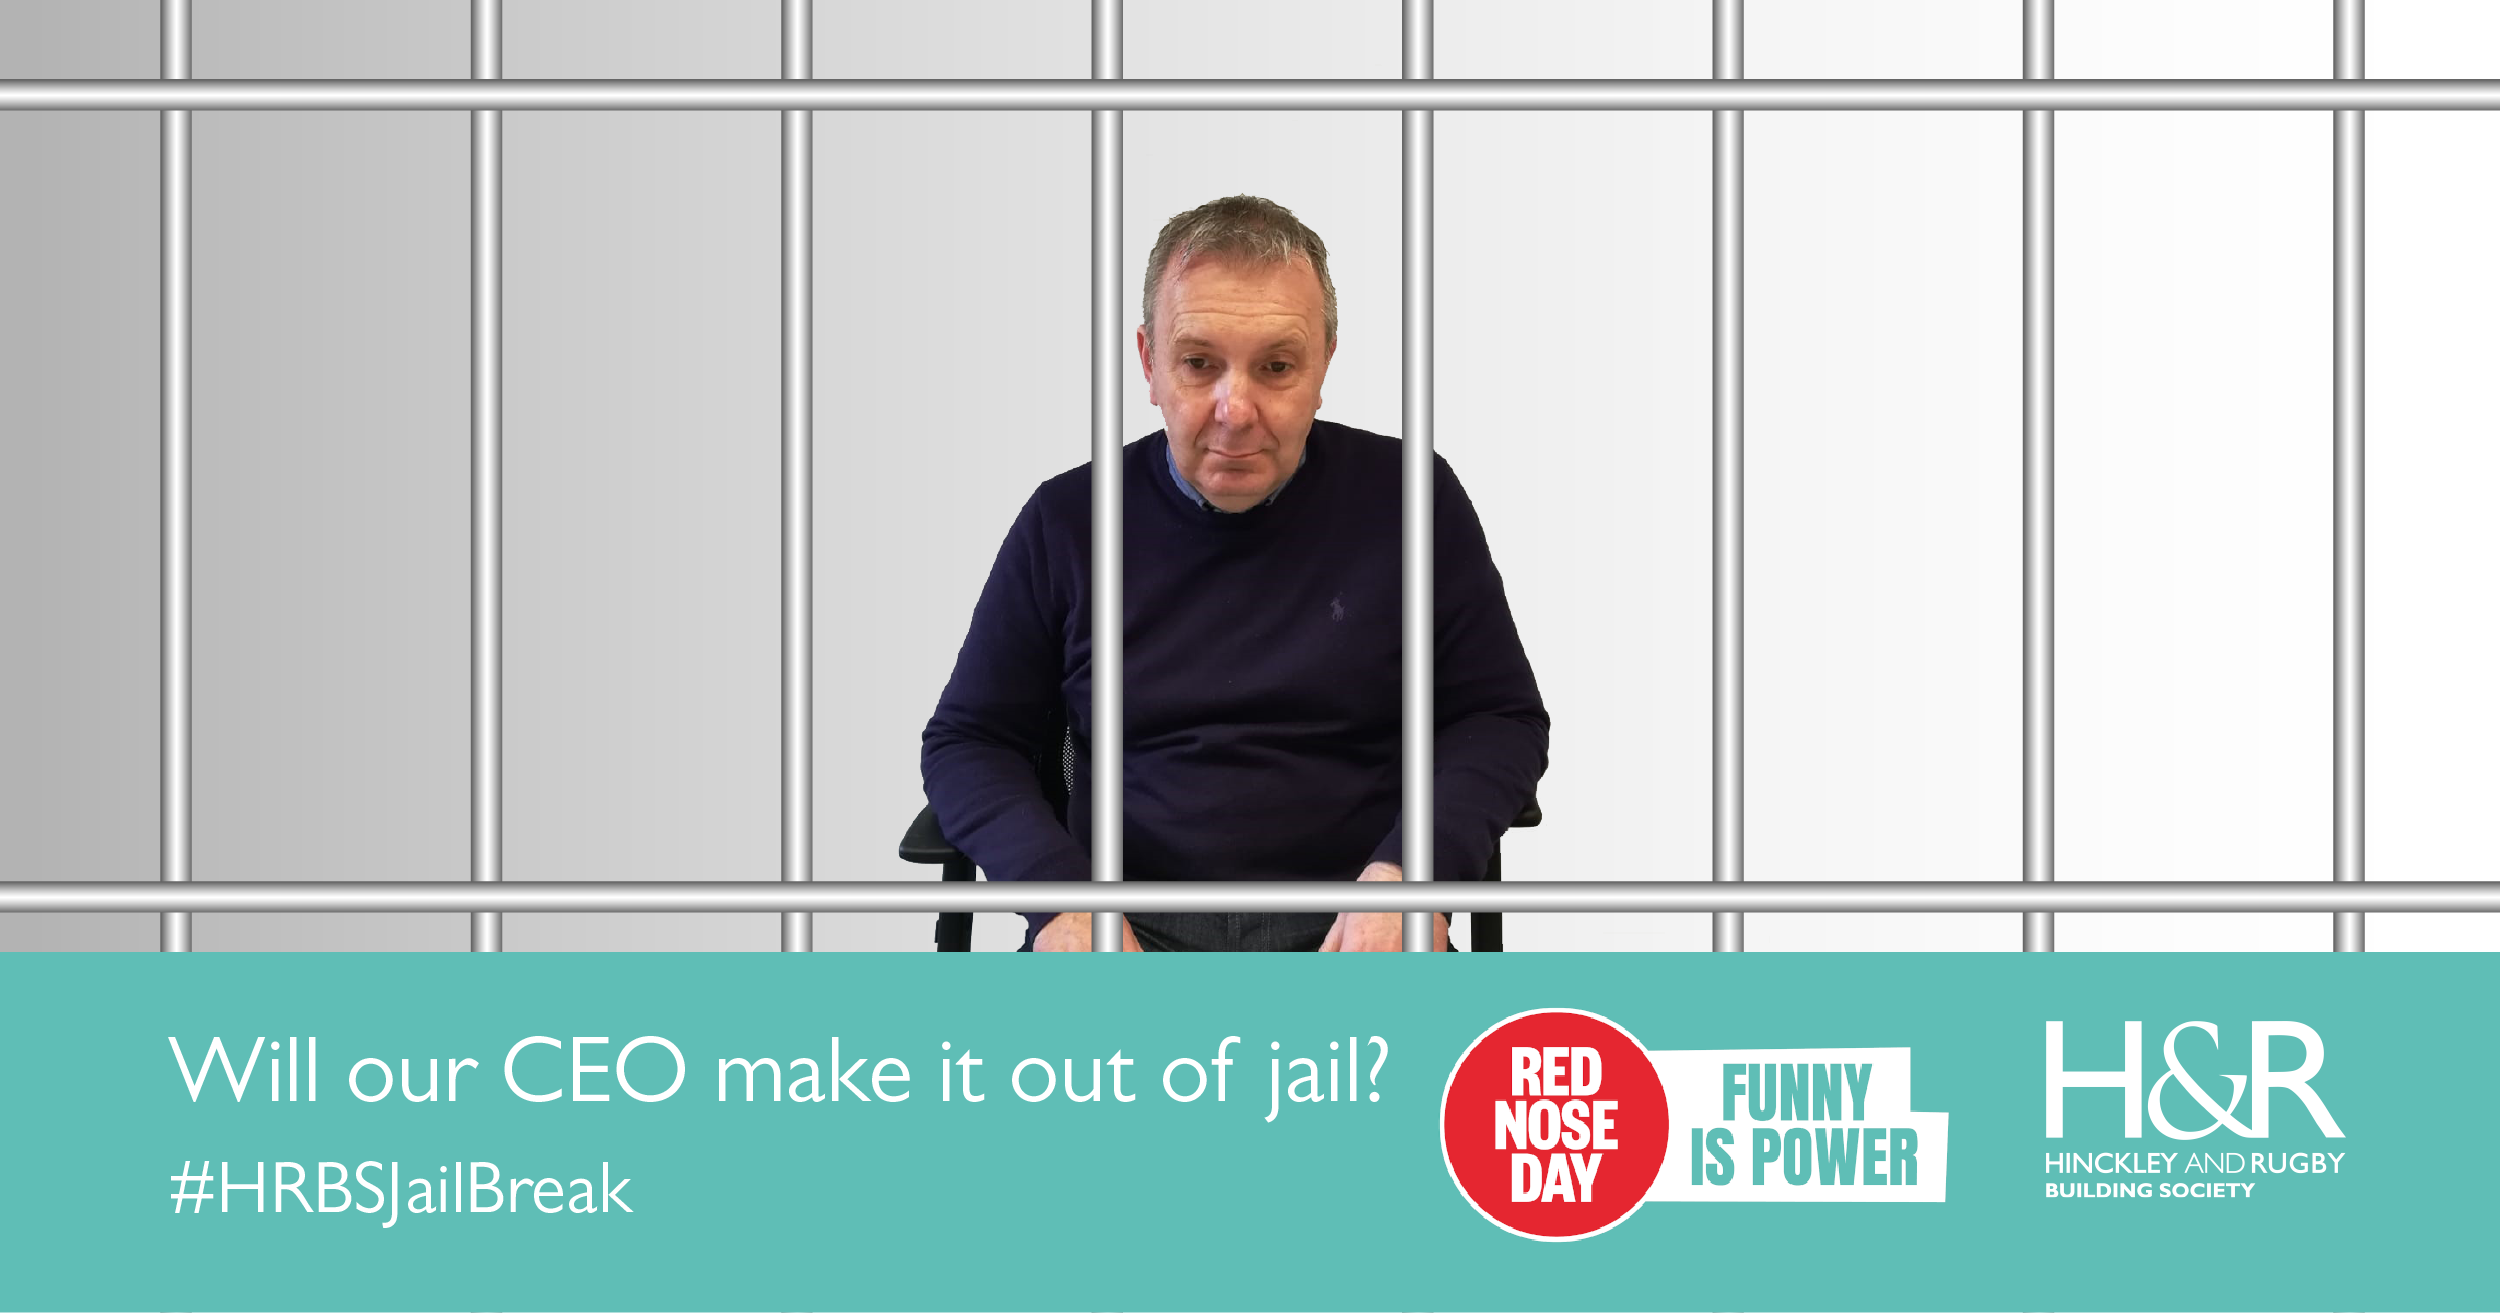 Jailbreak challenge for Hinckley & Rugby’s CEO aims to raise £2,000 for Comic Relief